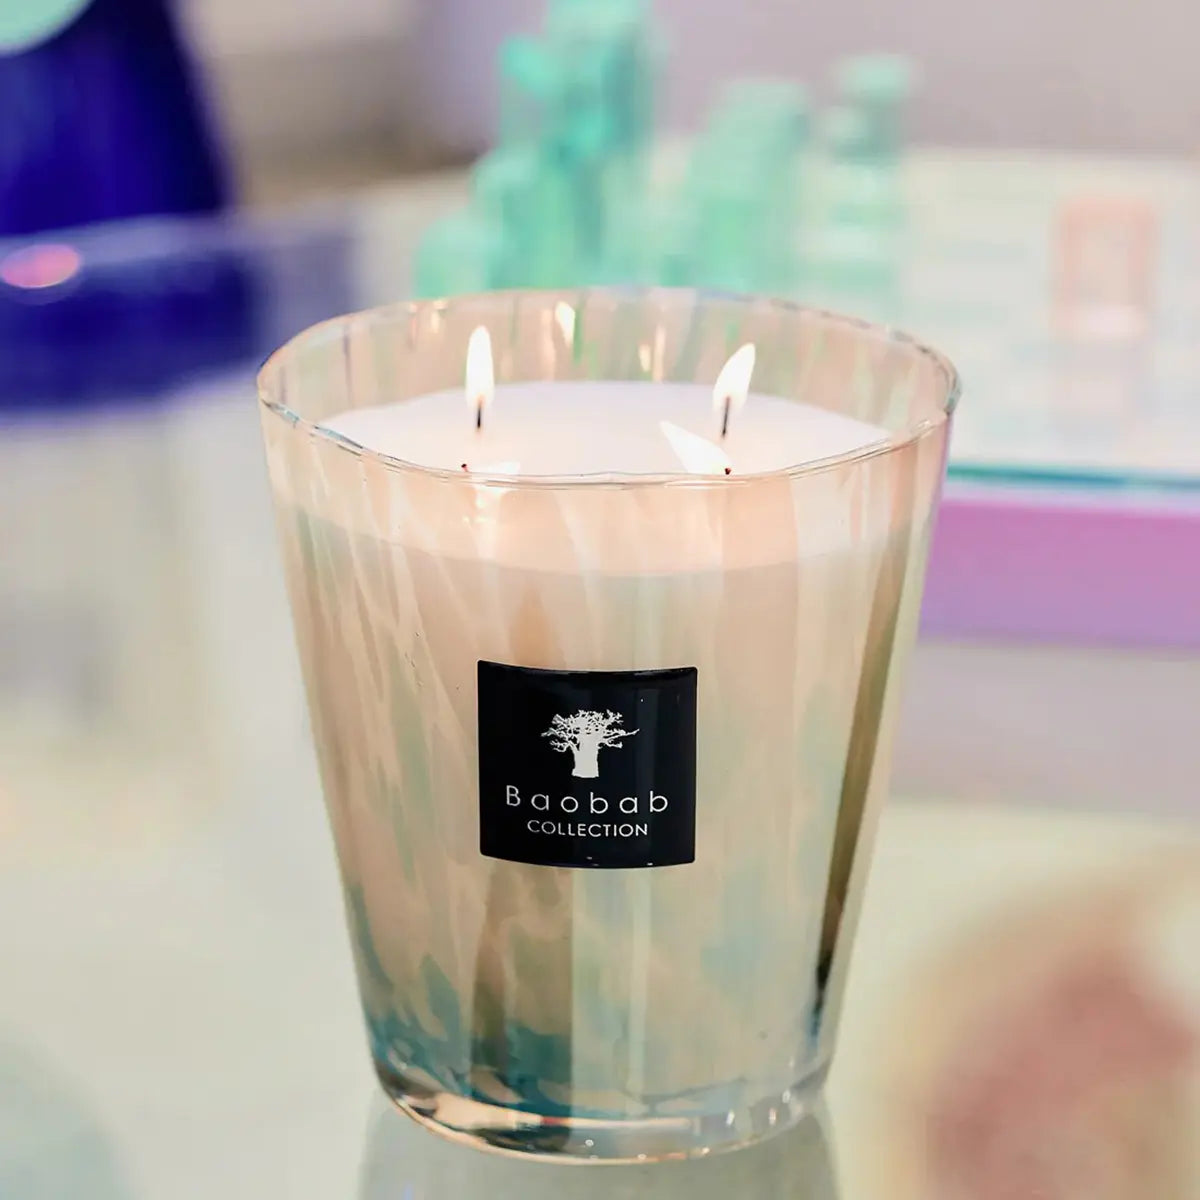 Baobab Collection Max 16 Pearls White Candle lit in a room on a glass table